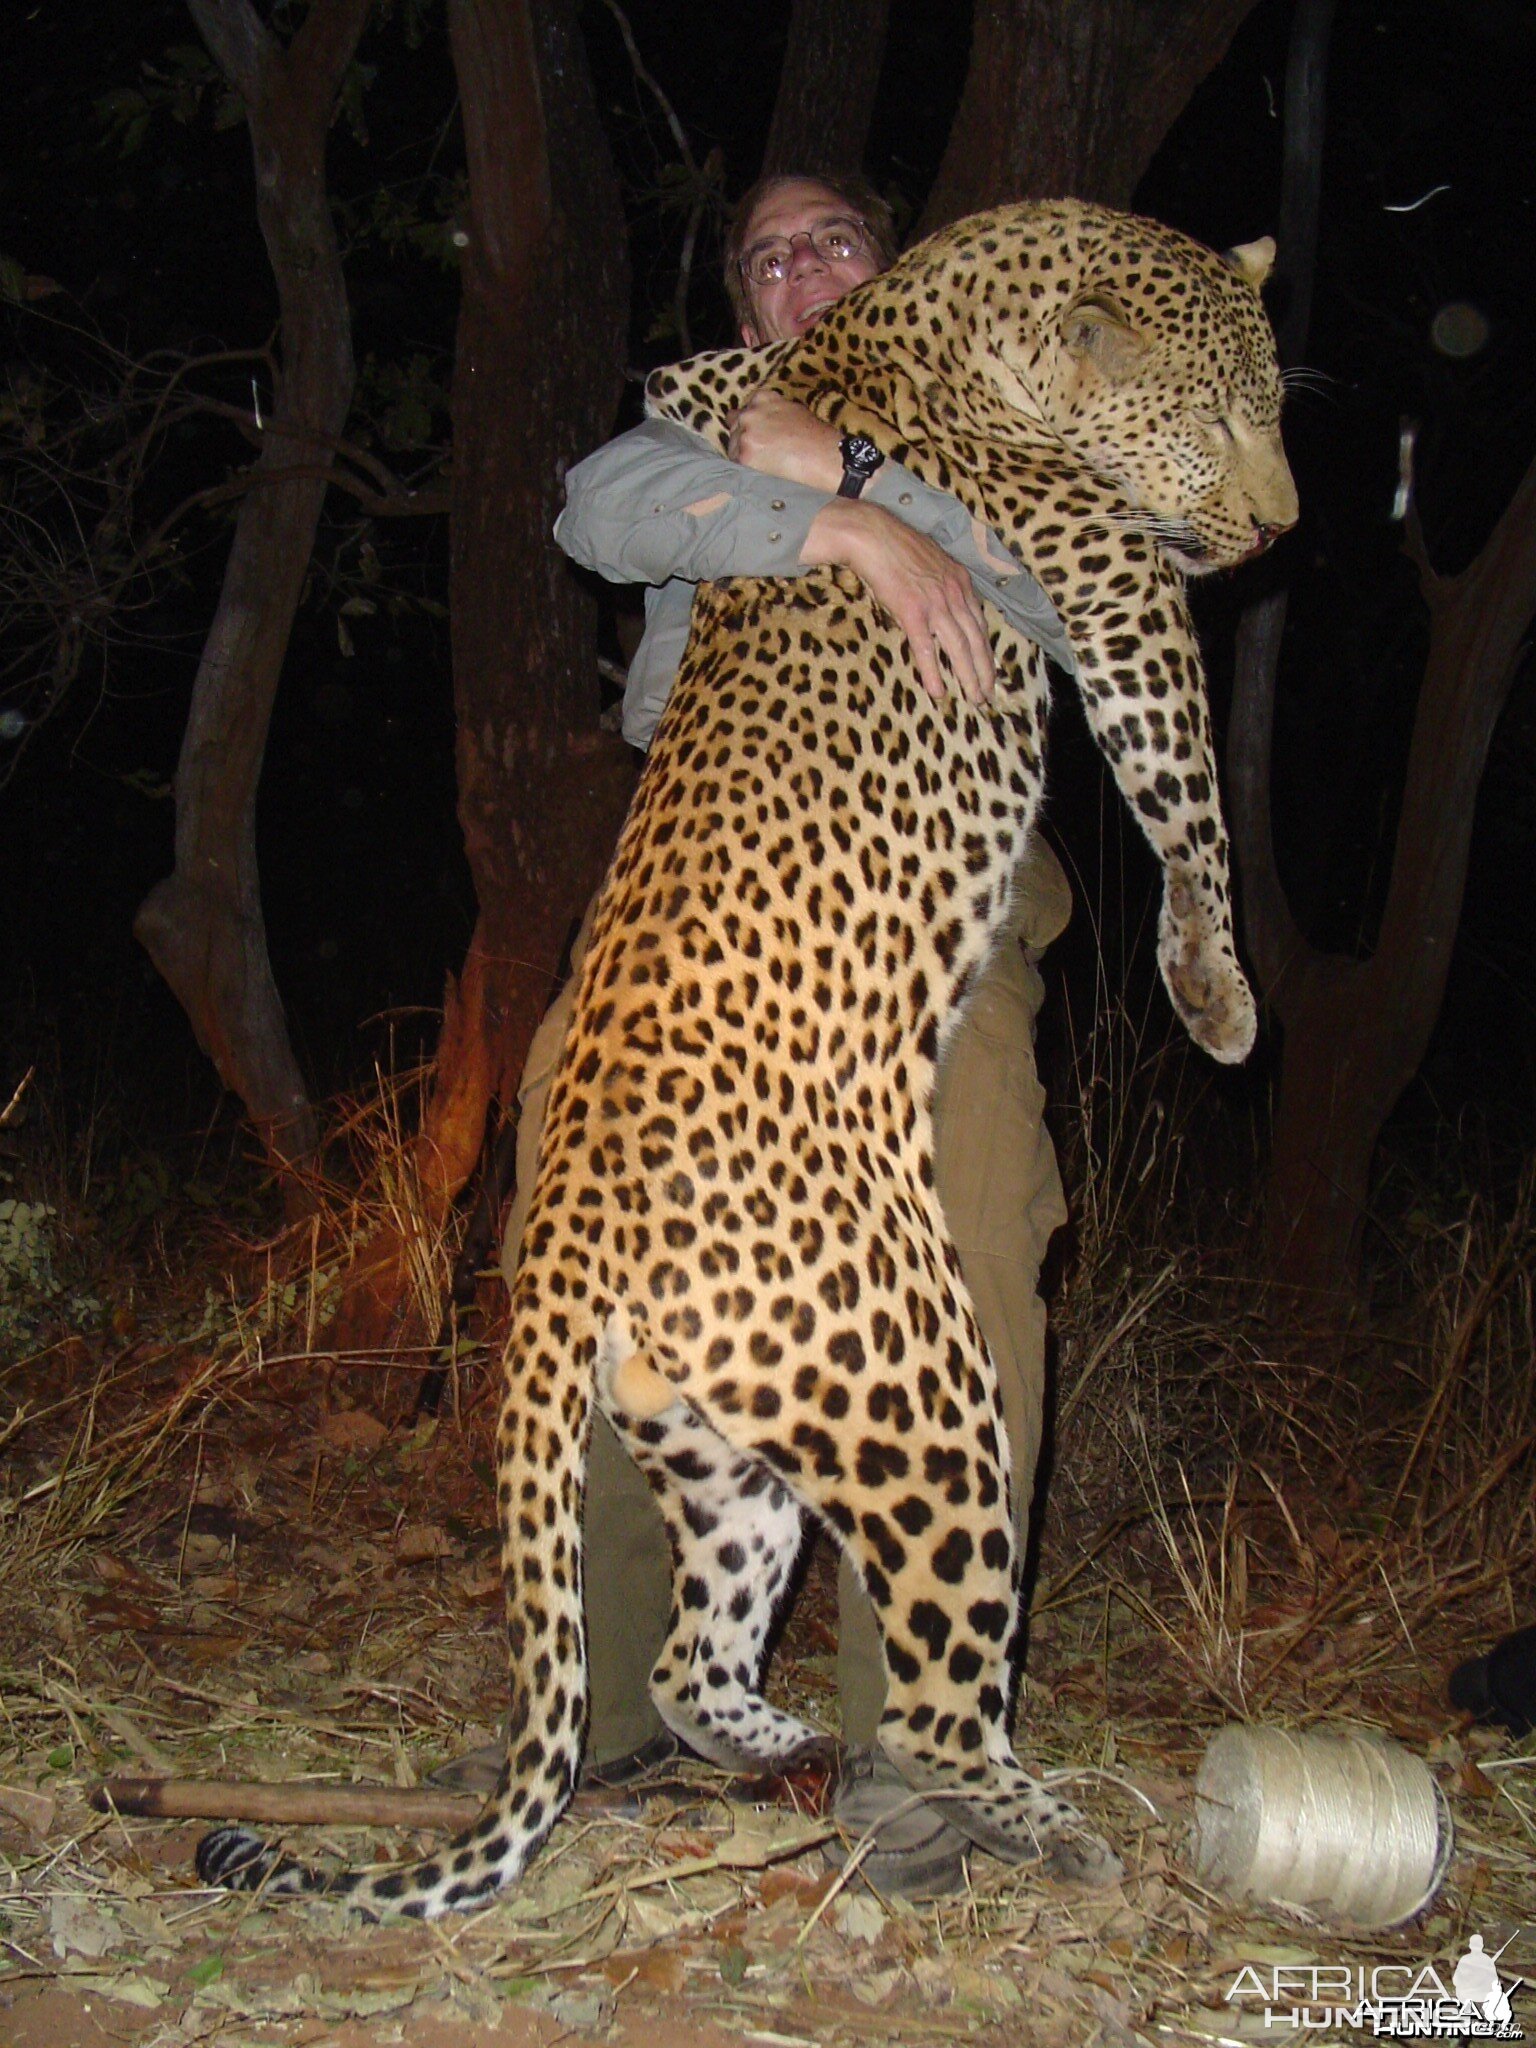 Monster Leopard hunted in Zambia with Prohunt Zambia | Hunting